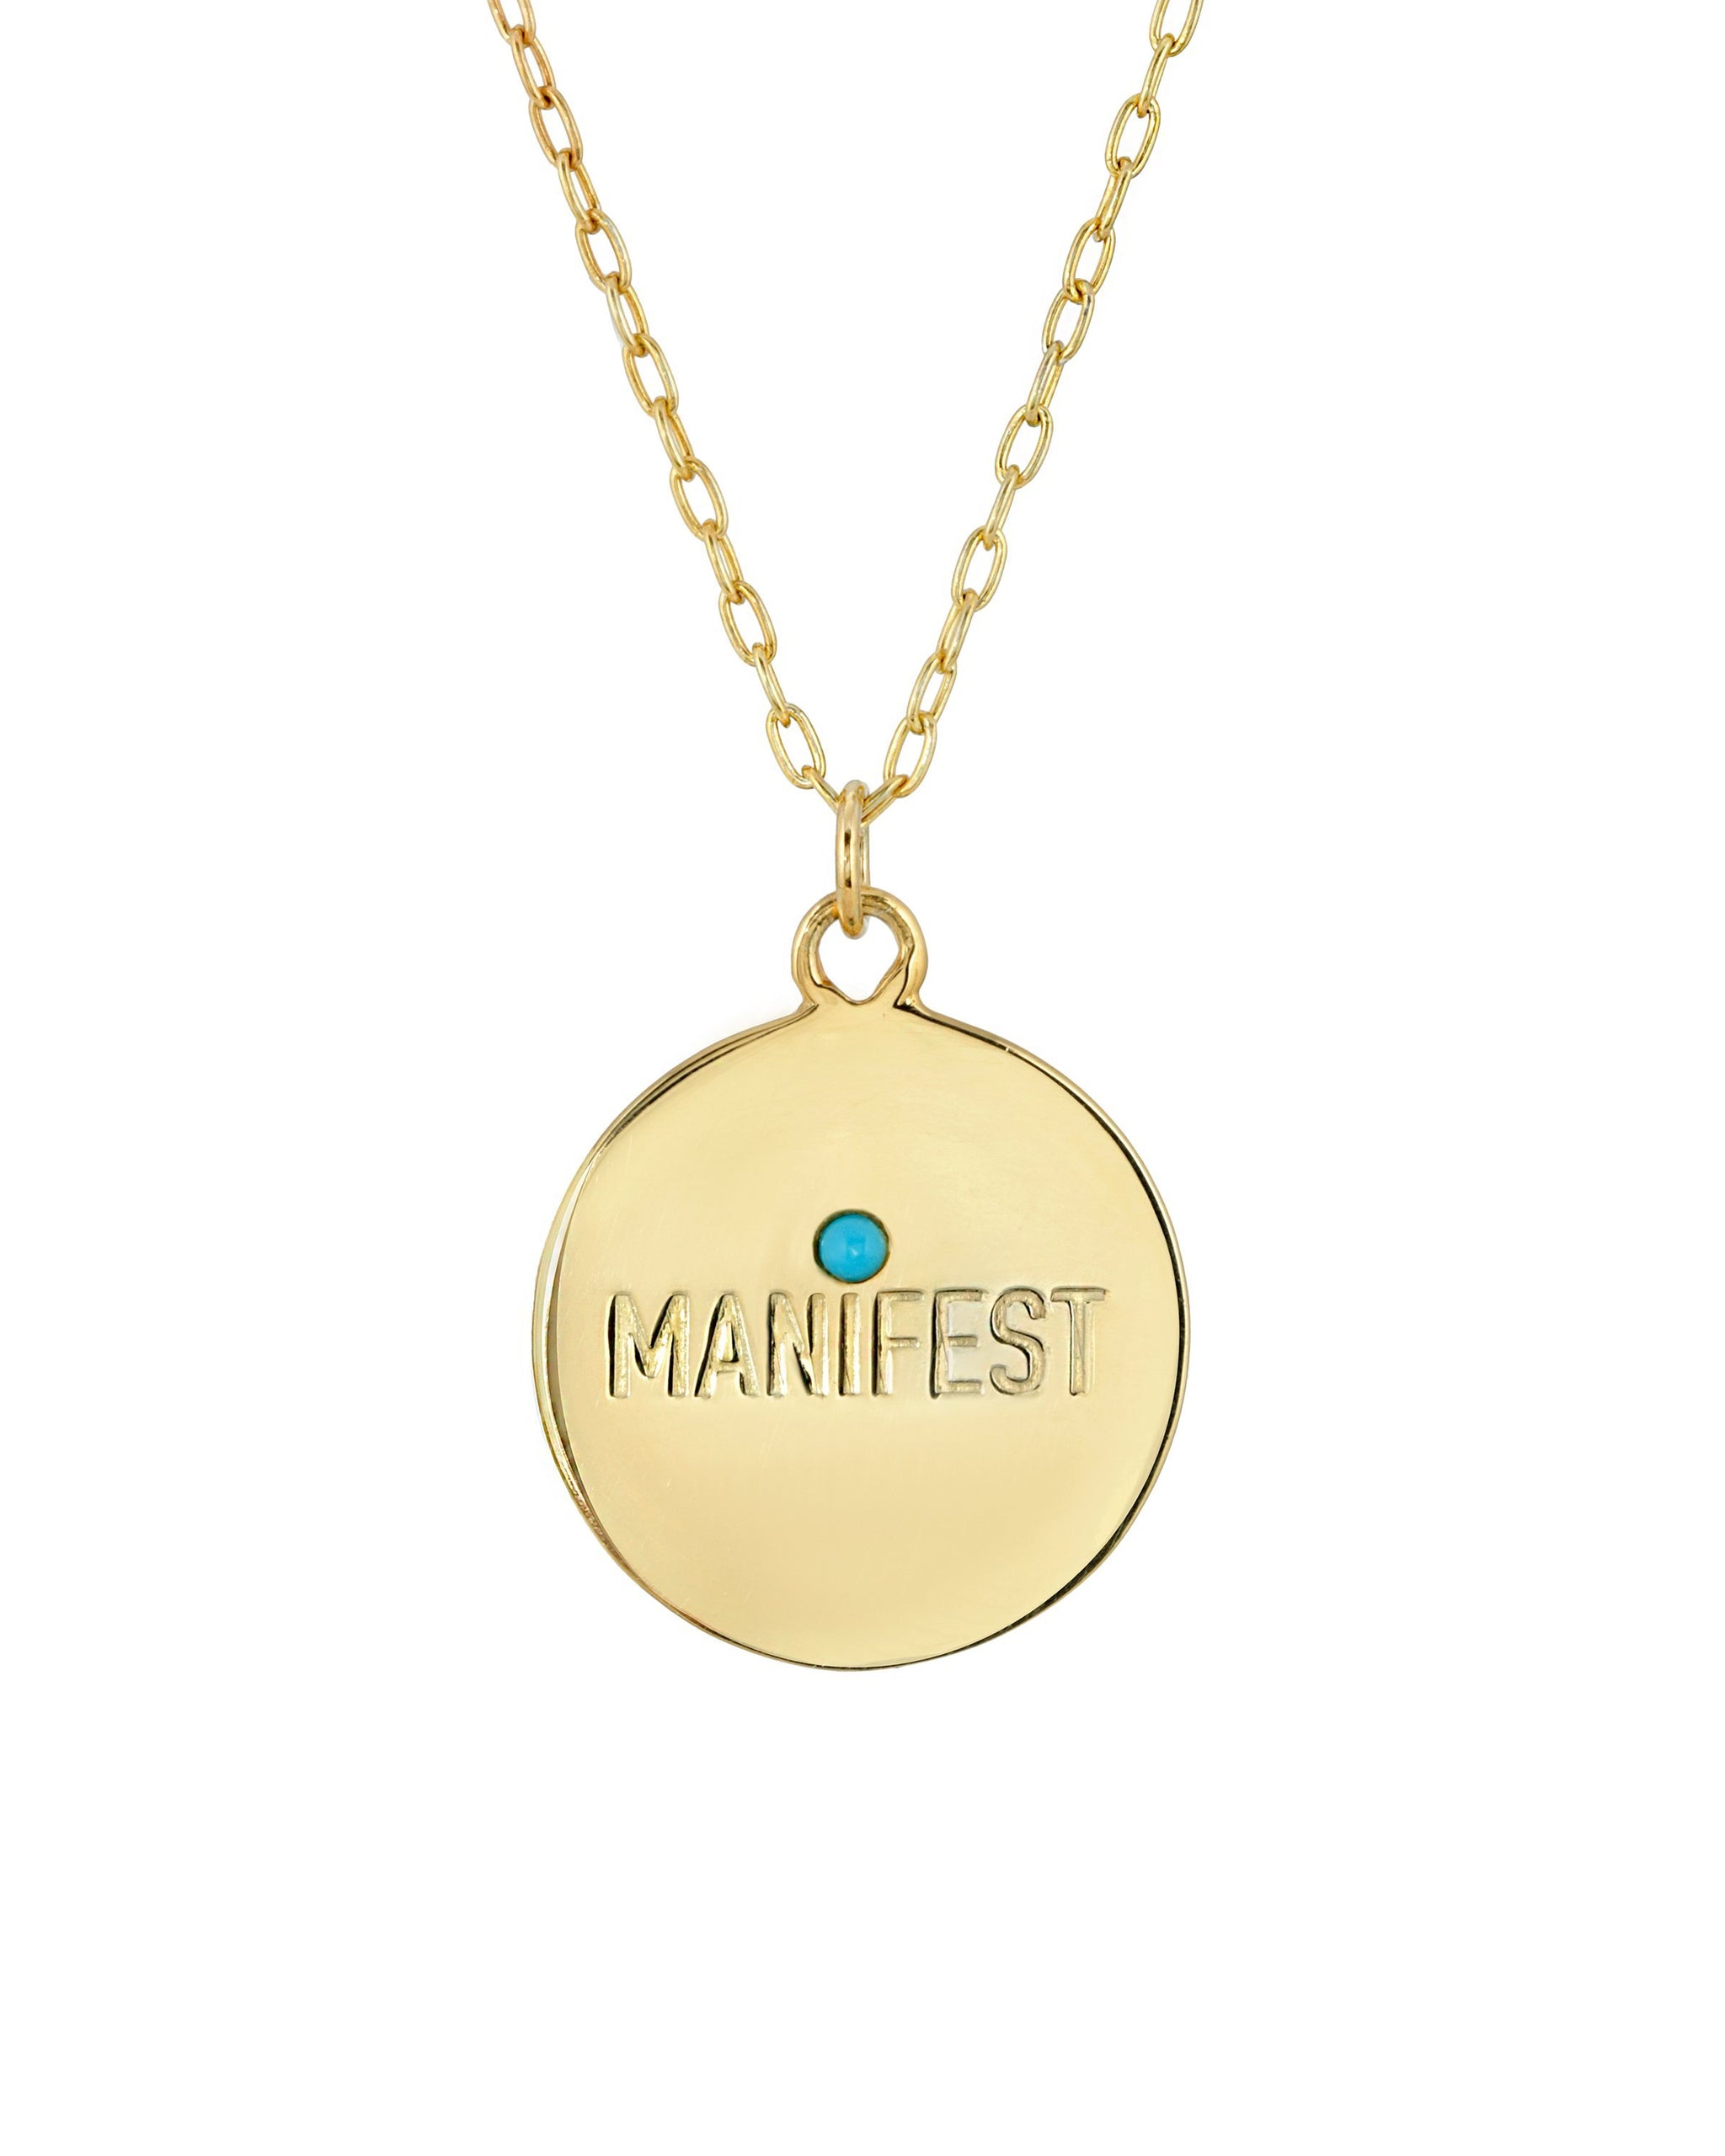 Manifest Necklace, Gold Vermeil Round Medallion with Manifest engraved and a 2mm semi precious stone. Handmade by Turquoise + Tobacco in Los Angeles, California